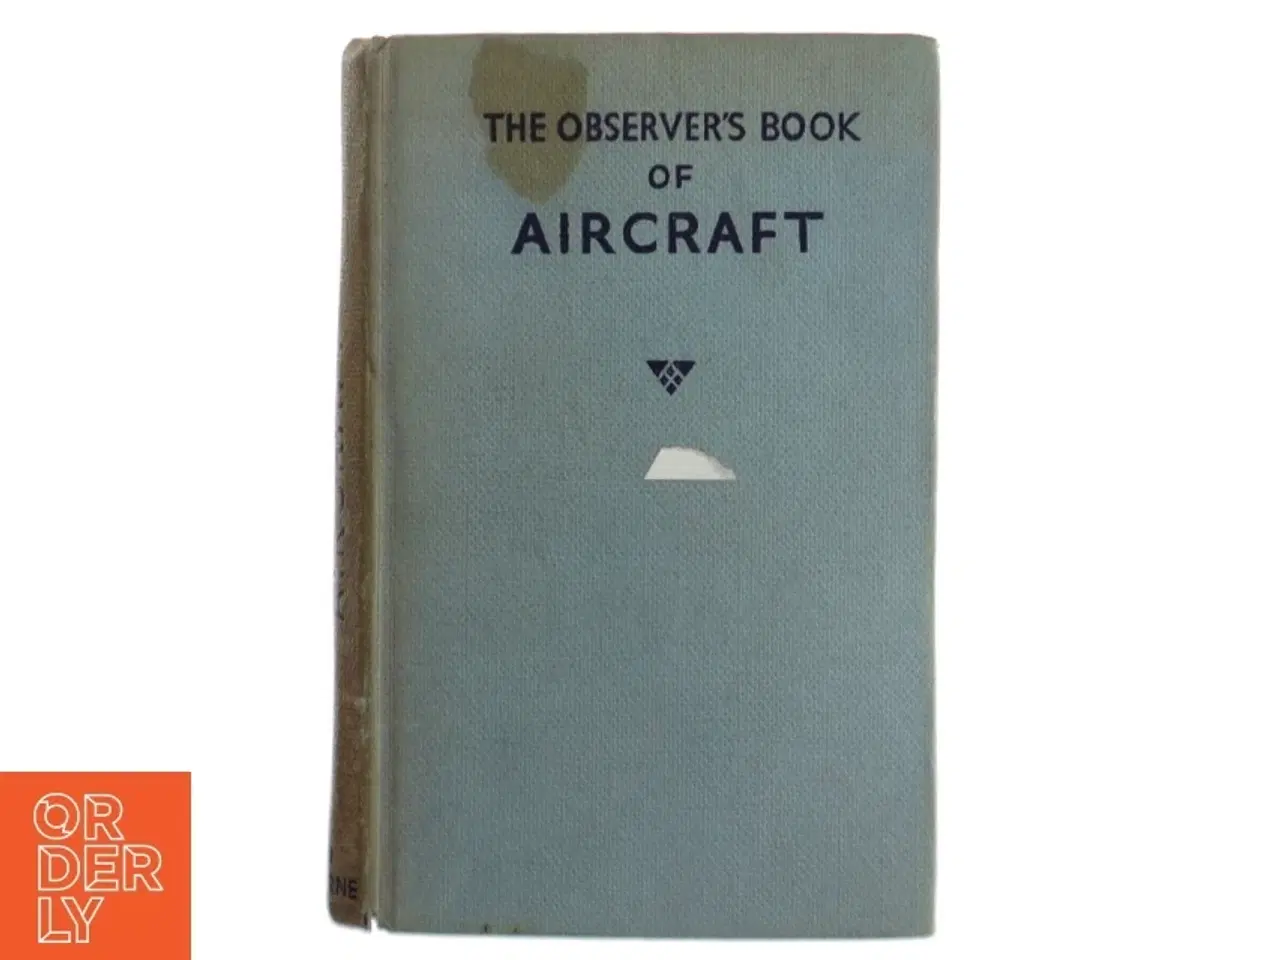 Billede 1 - The observers book of aircraft